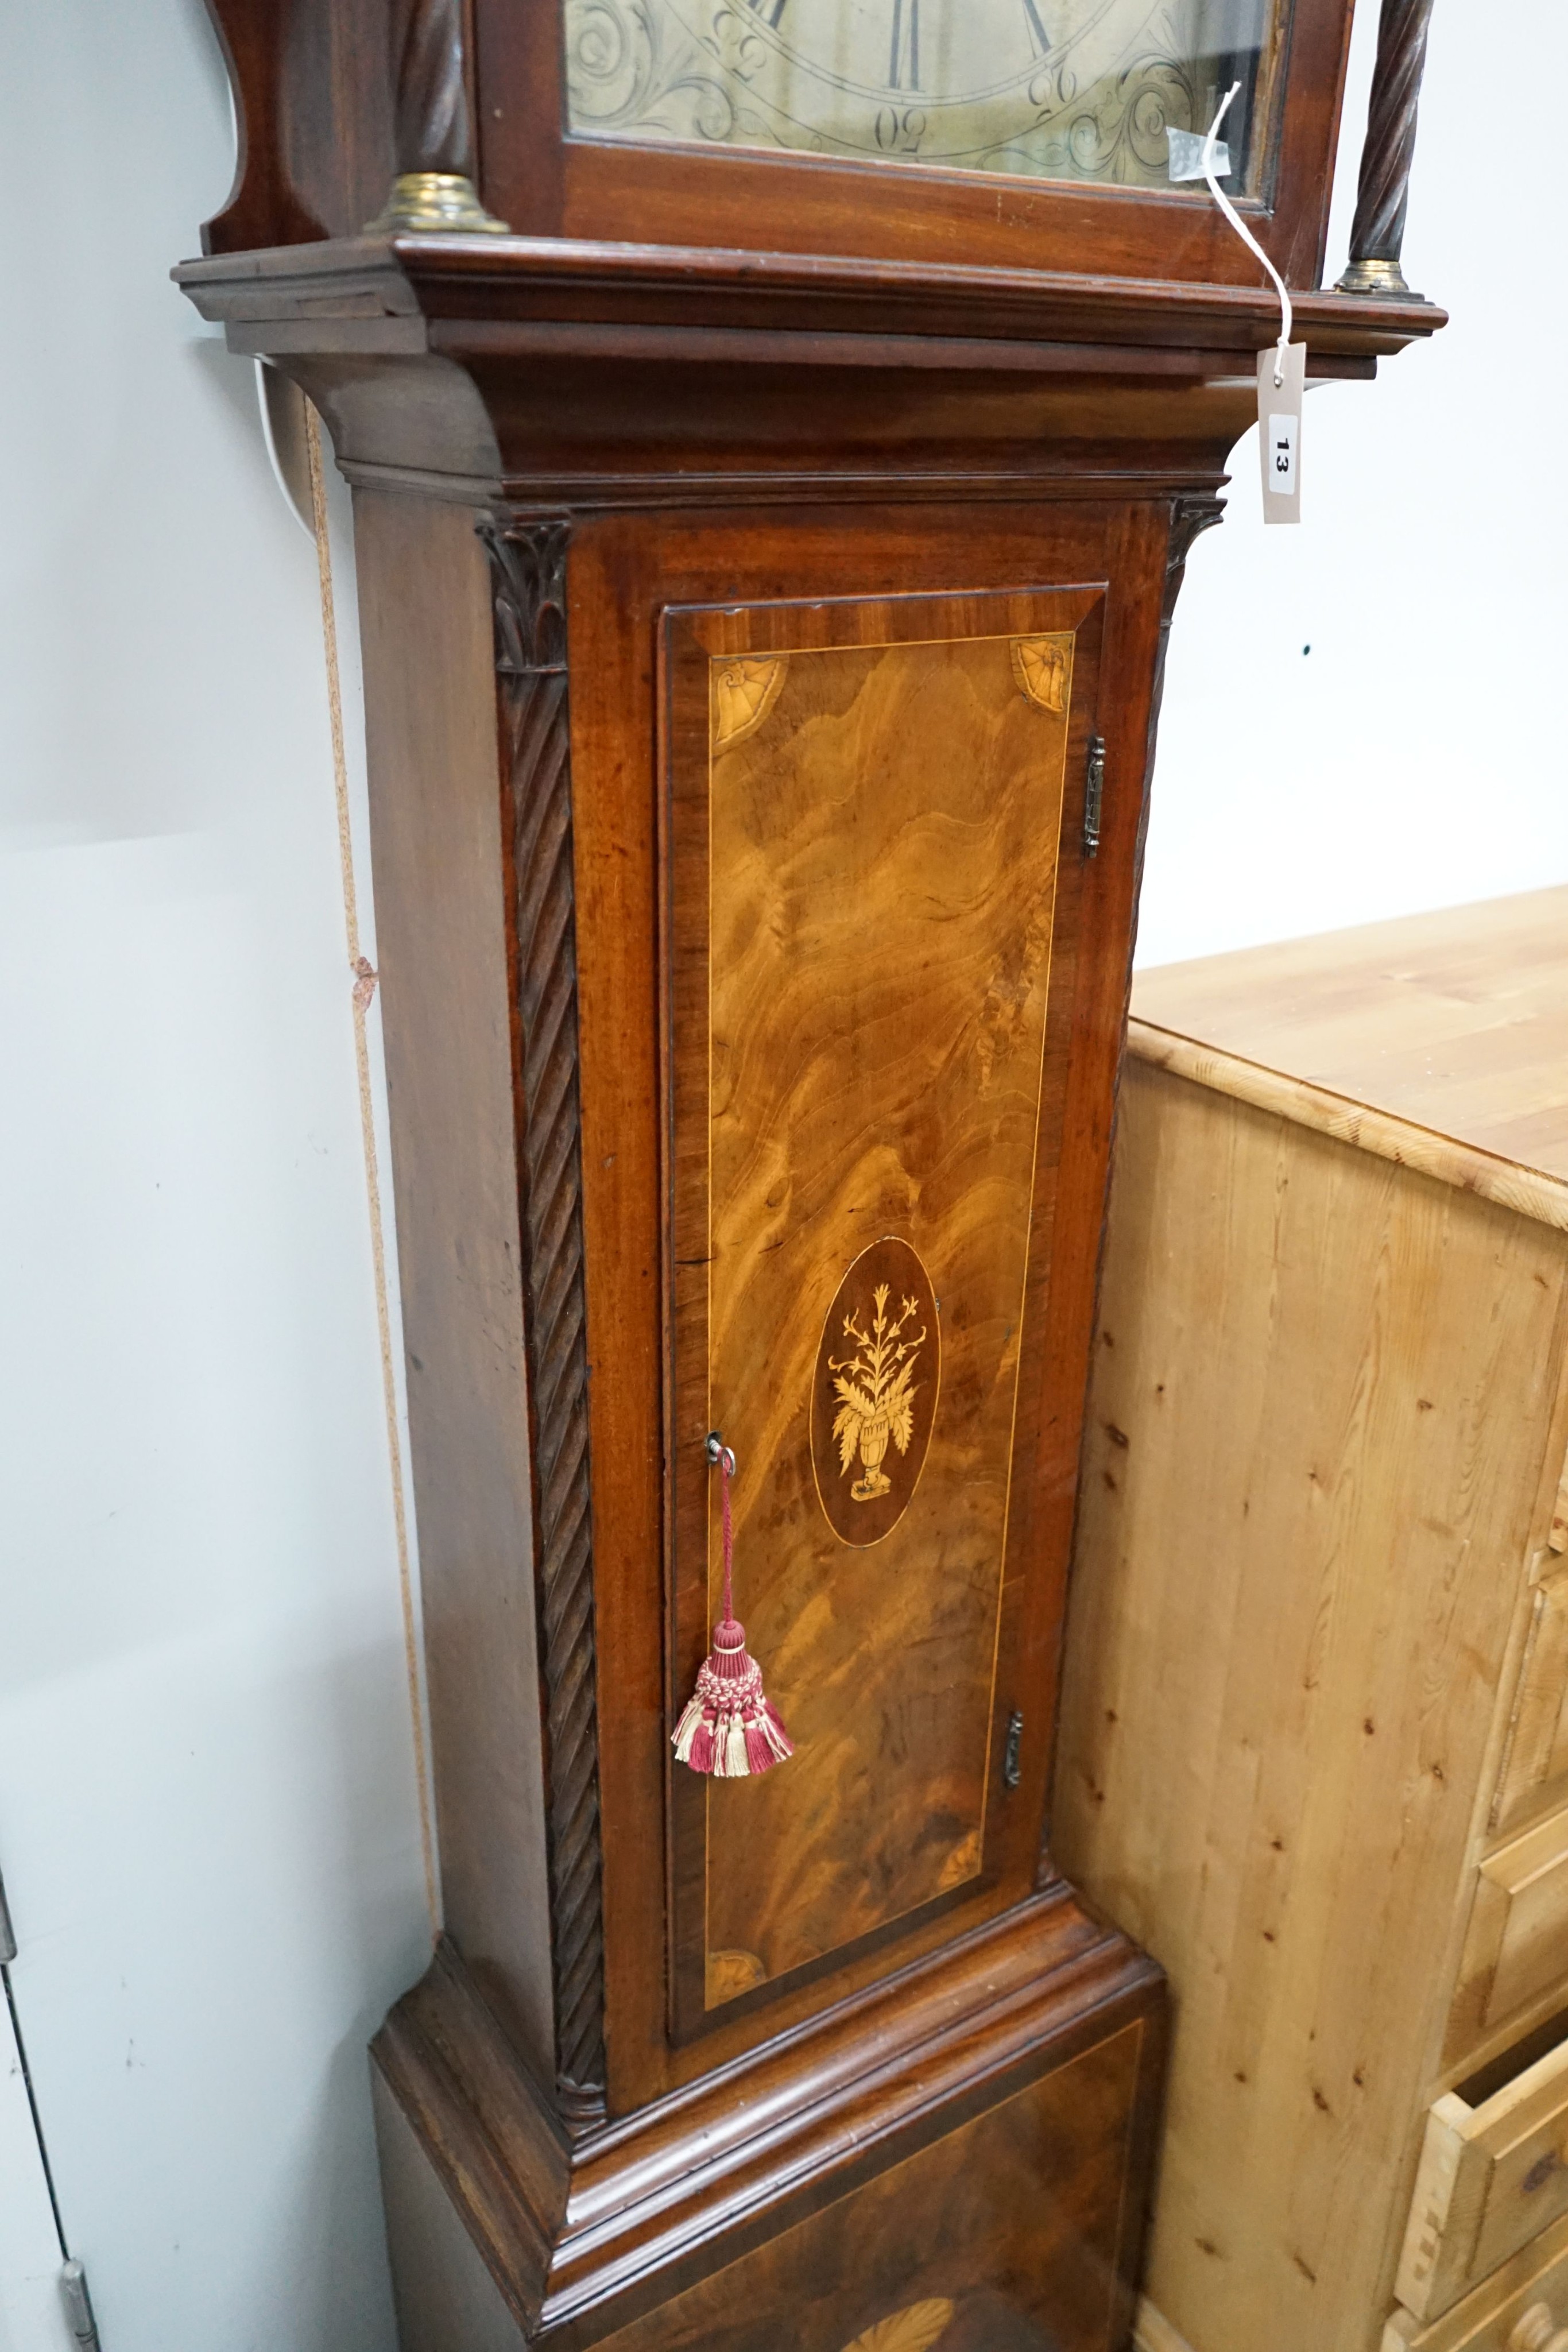 A George III inlaid mahogany 8 day longcase clock, marked Mitchell & Son, Gorbals, with key, - Image 3 of 5